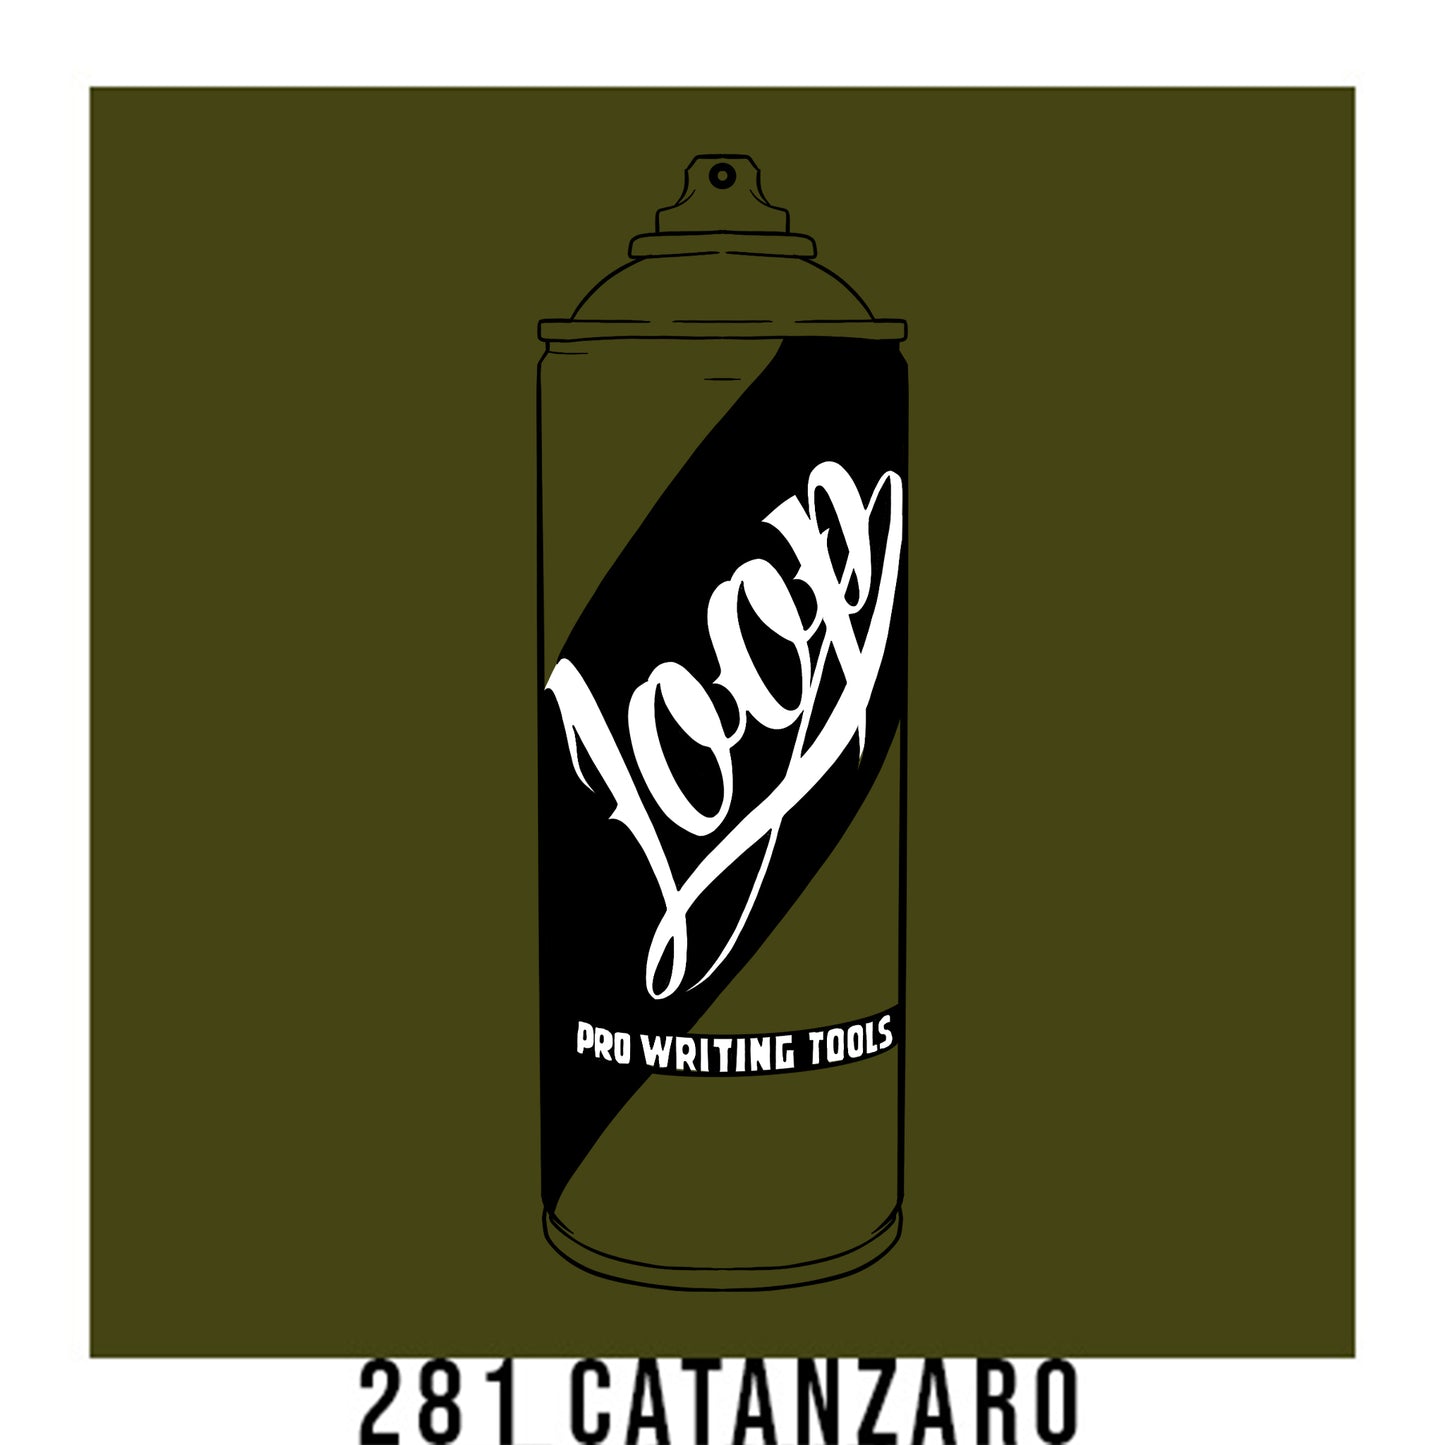 A black outline drawing of a Olive Green spray paint can with the word "Loop" written on the face in script. The background is a color swatch of the same Olive Green with a white border with the words "281 Catanzaro" at the bottom.